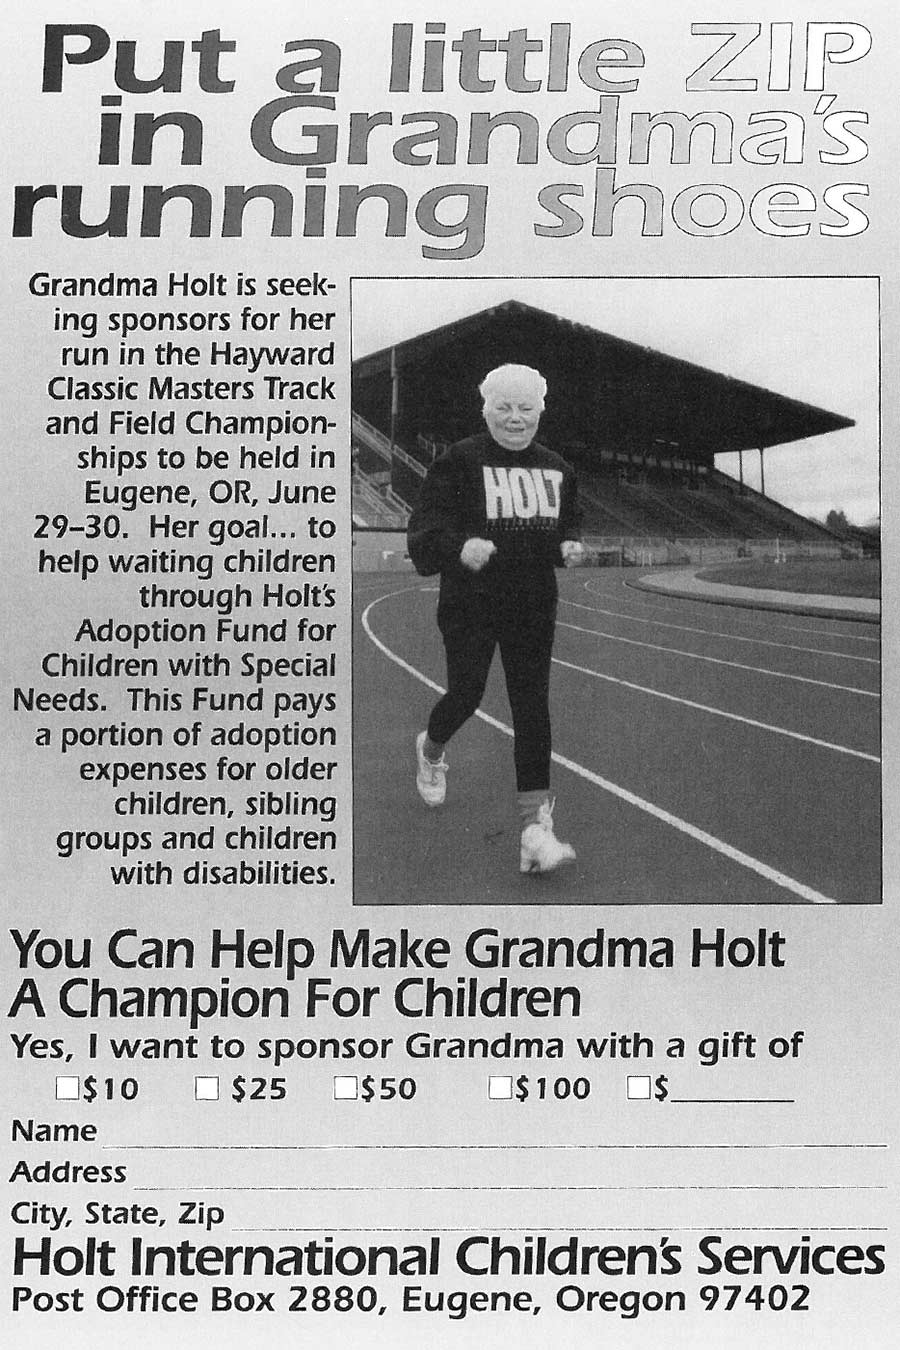 scan of magazine appeal to donate to grandma's run